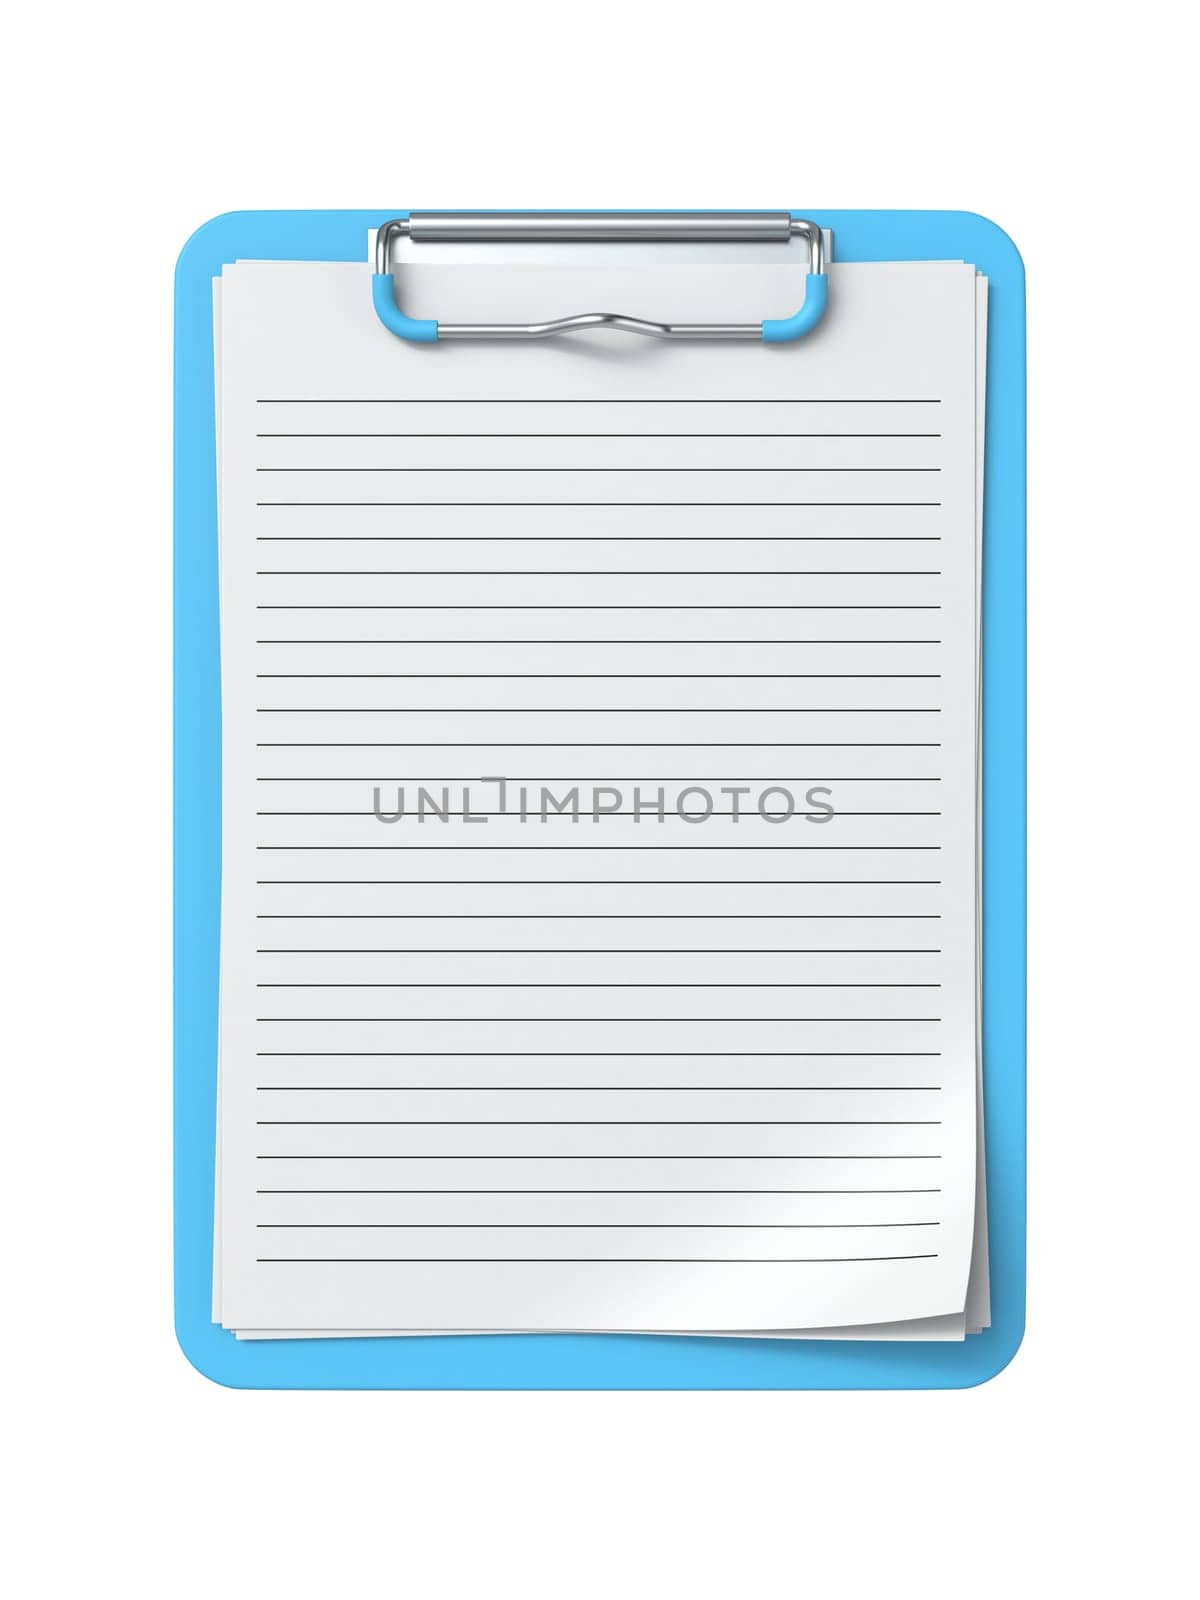 Blue clipboard 3D rendering illustration isolated on white background